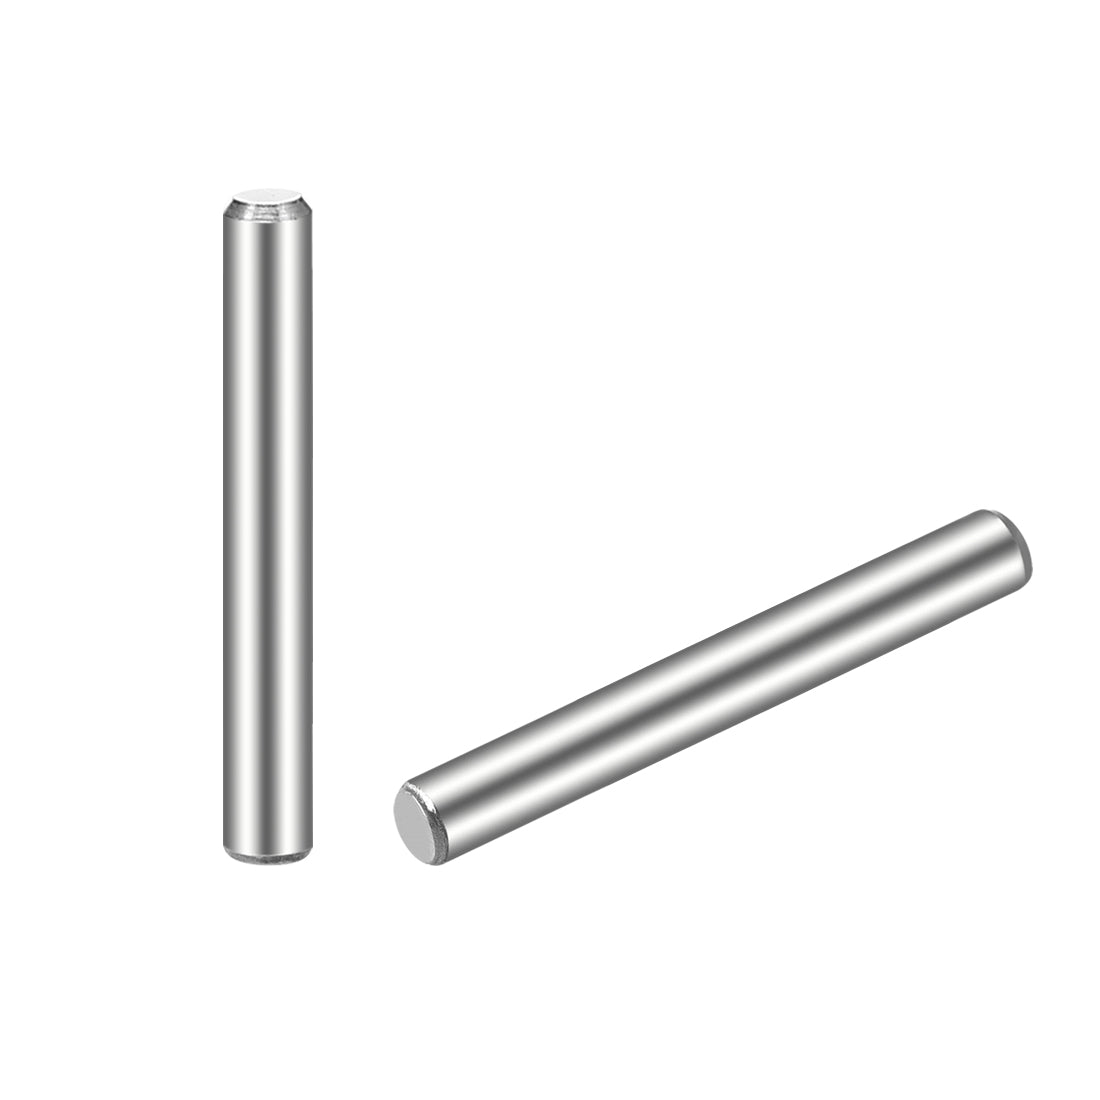 uxcell Uxcell 50Pcs Dowel Pin 304 Stainless Steel Cylindrical Shelf Support Pin